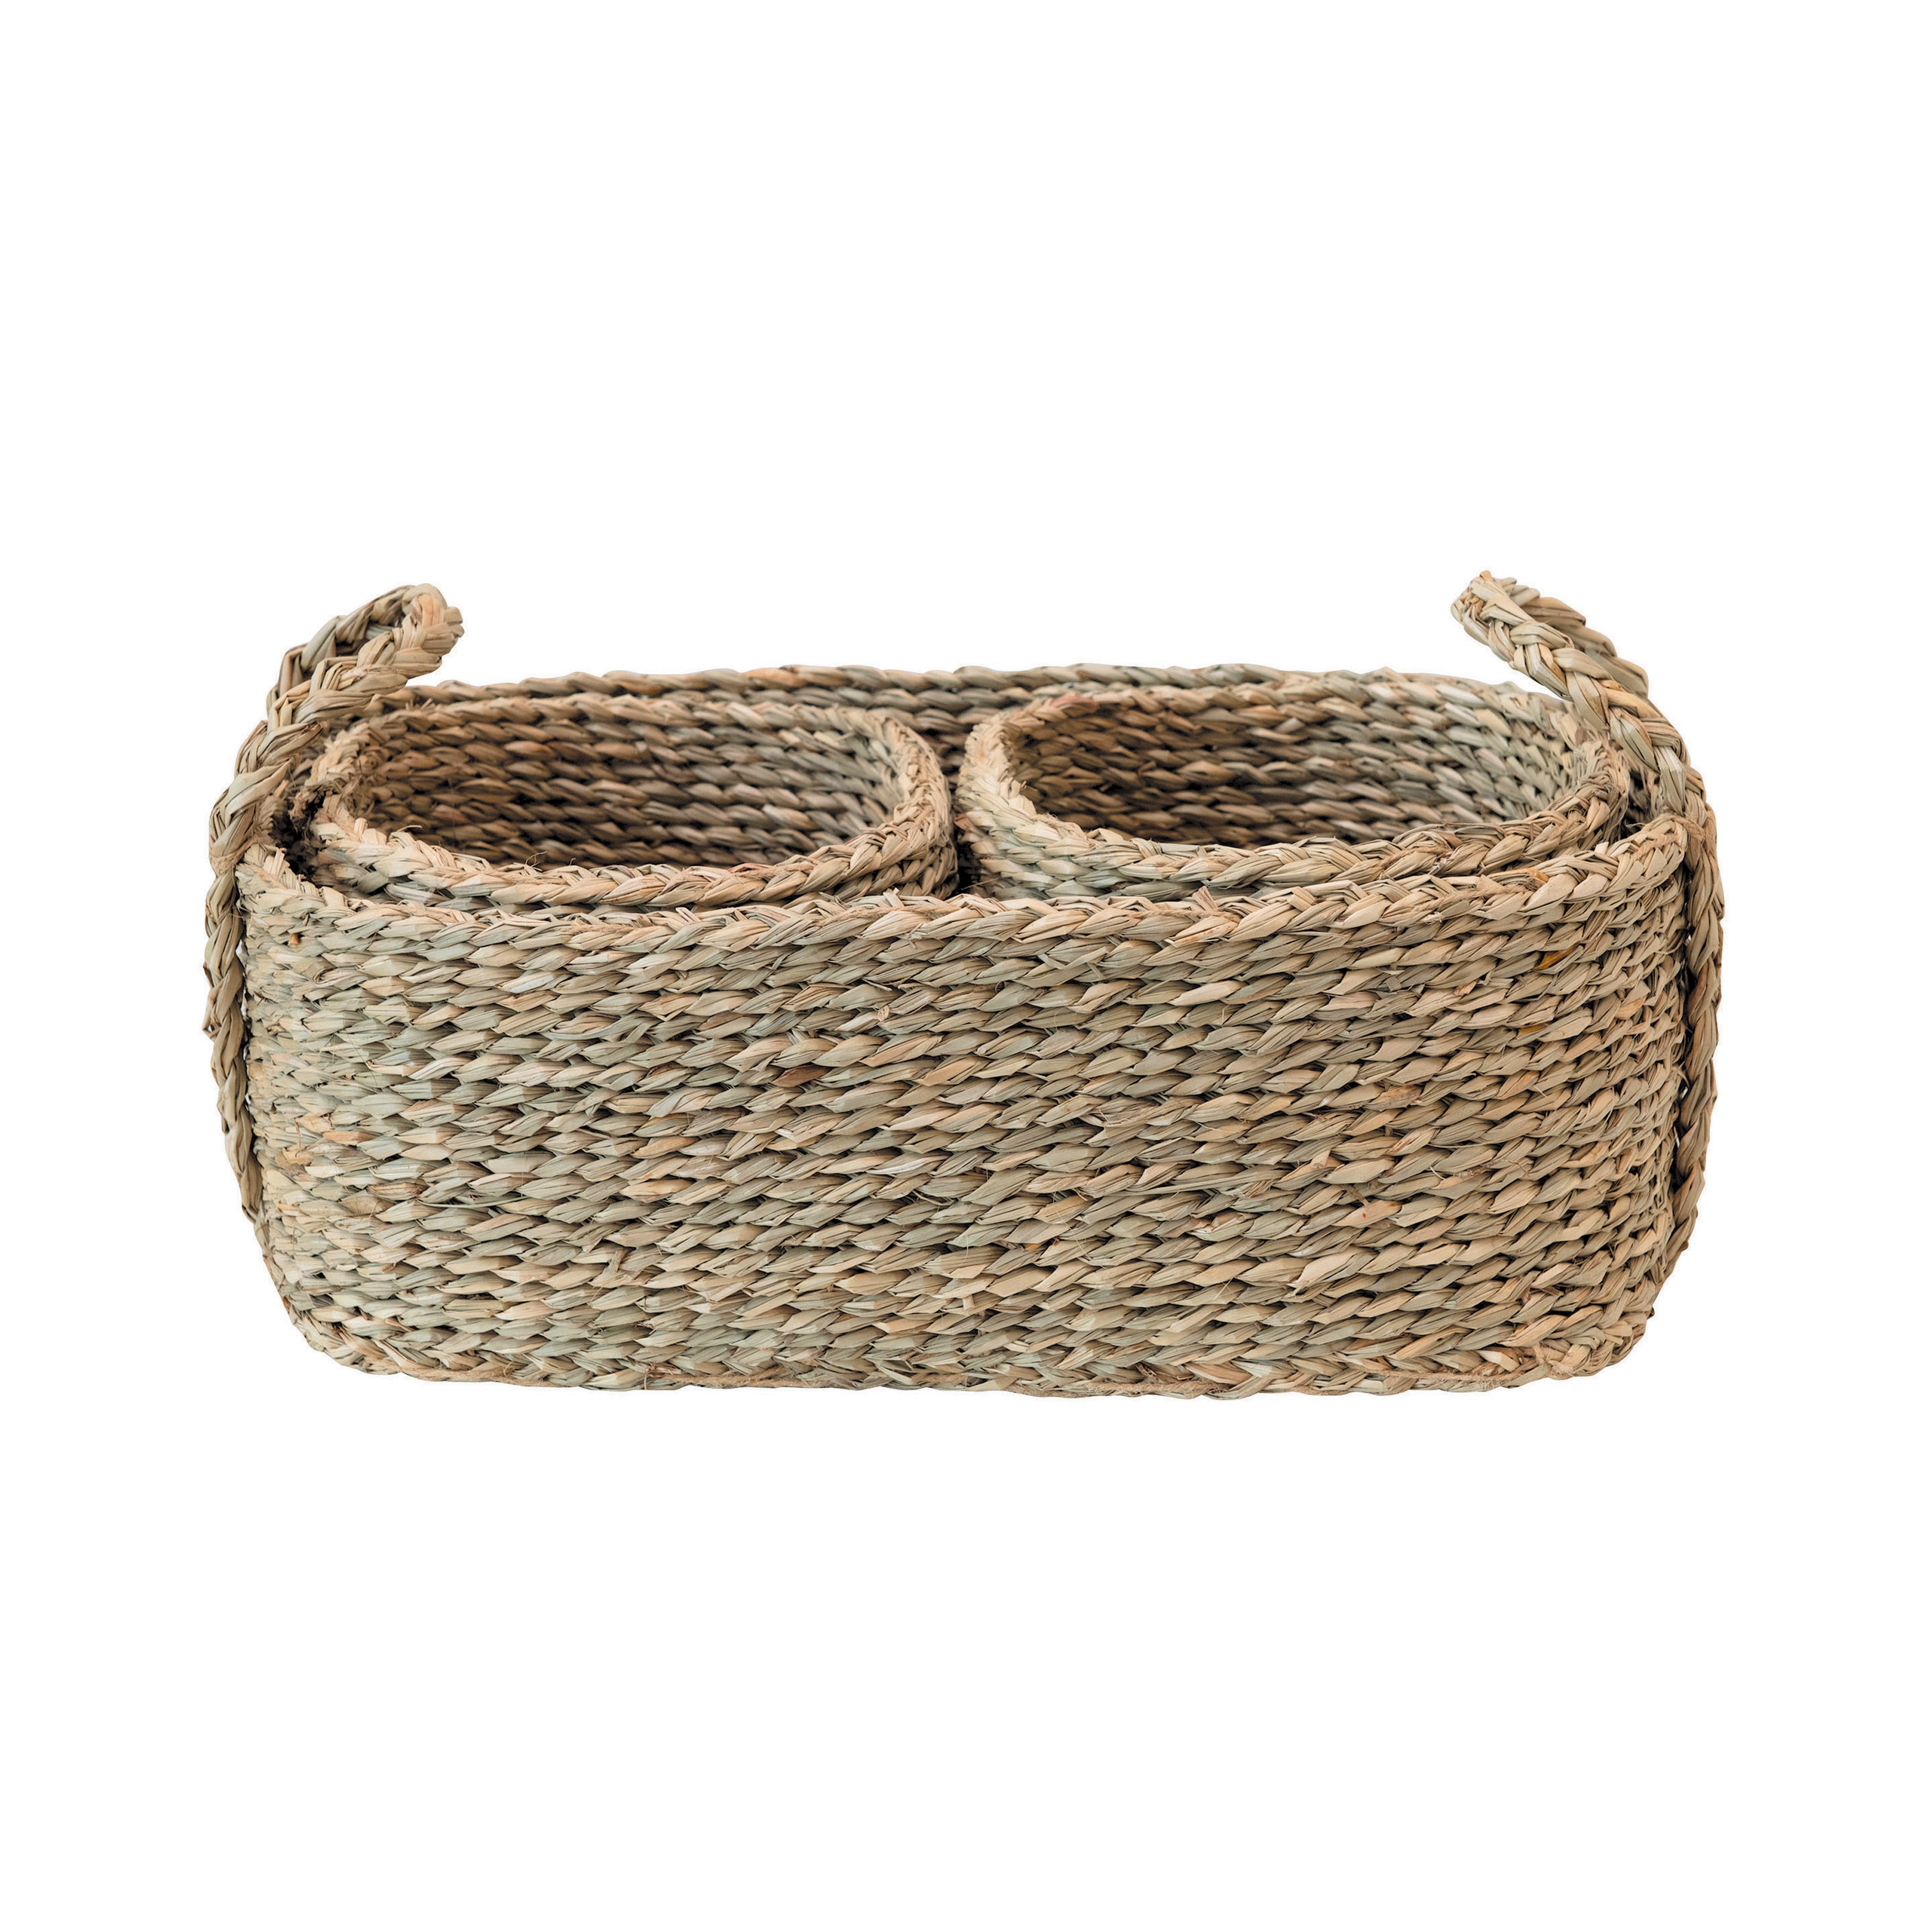 Hand-Woven Seagrass Nested Baskets, Natural, Set of 3 - Image 0